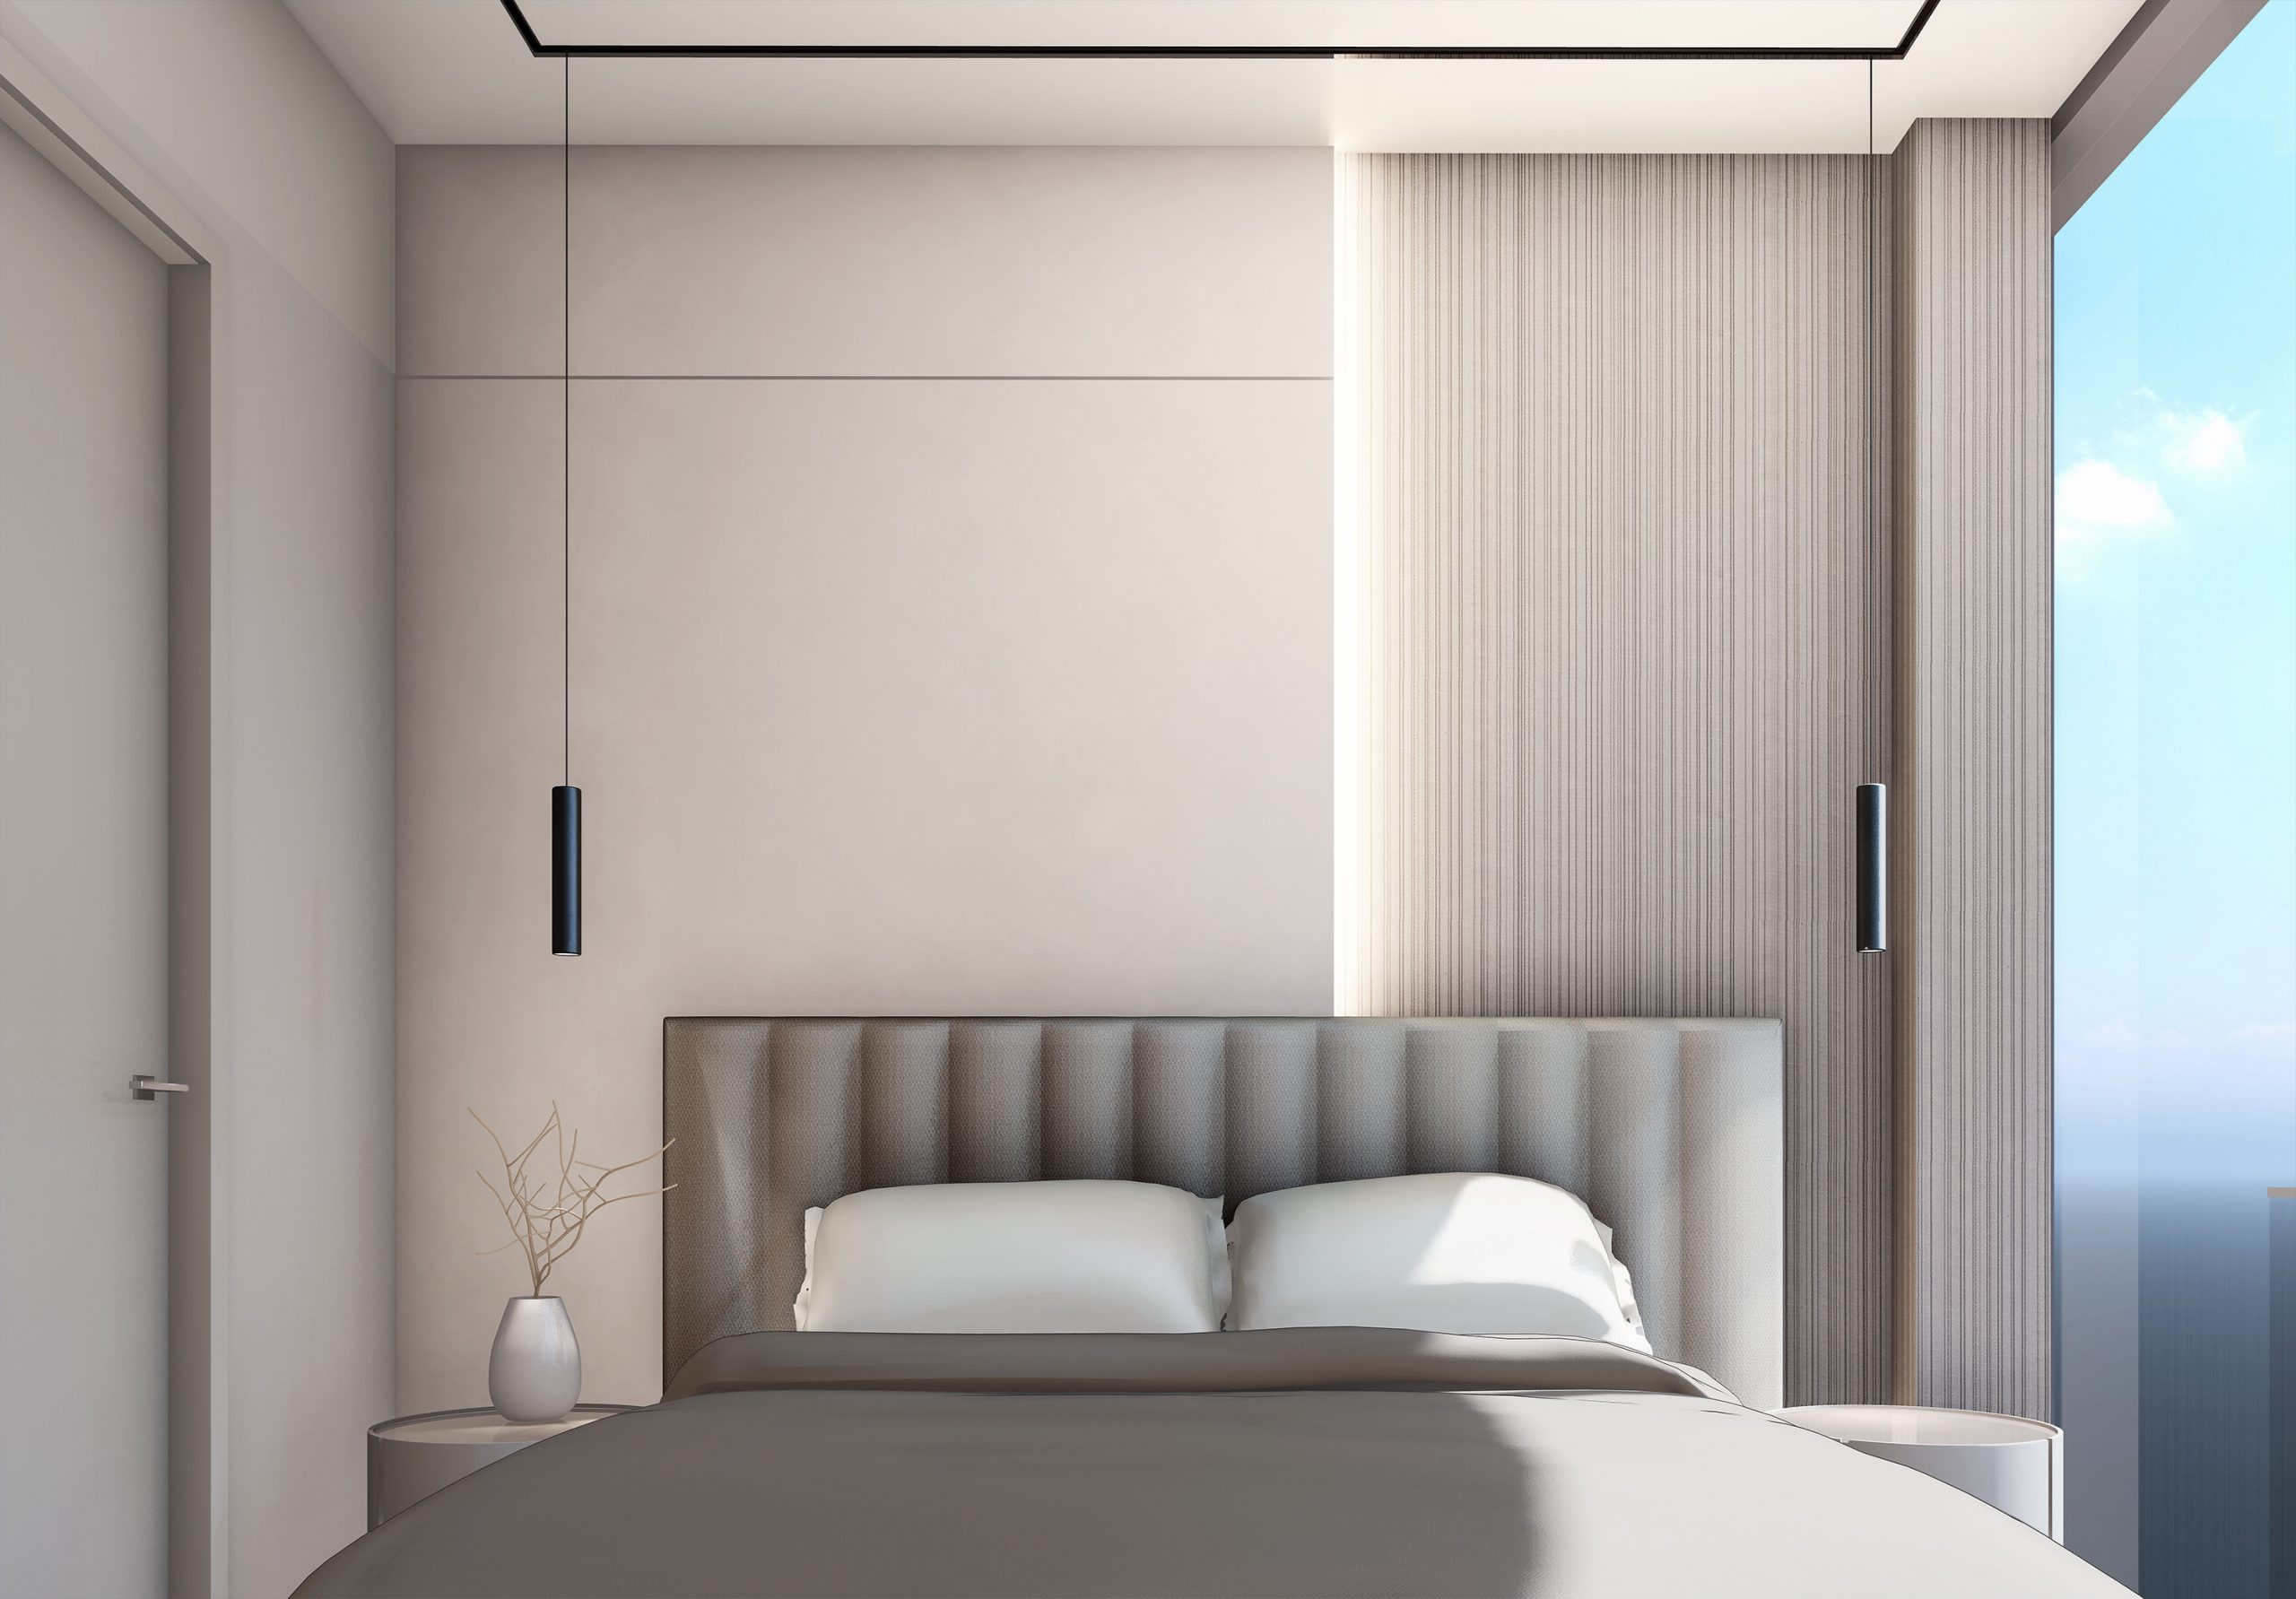 Minimalist asymmetrical bedroom, predominantly white and light-gray color palete, stripped wallpaper, minimalist round nightstands, and black sleek design pendants